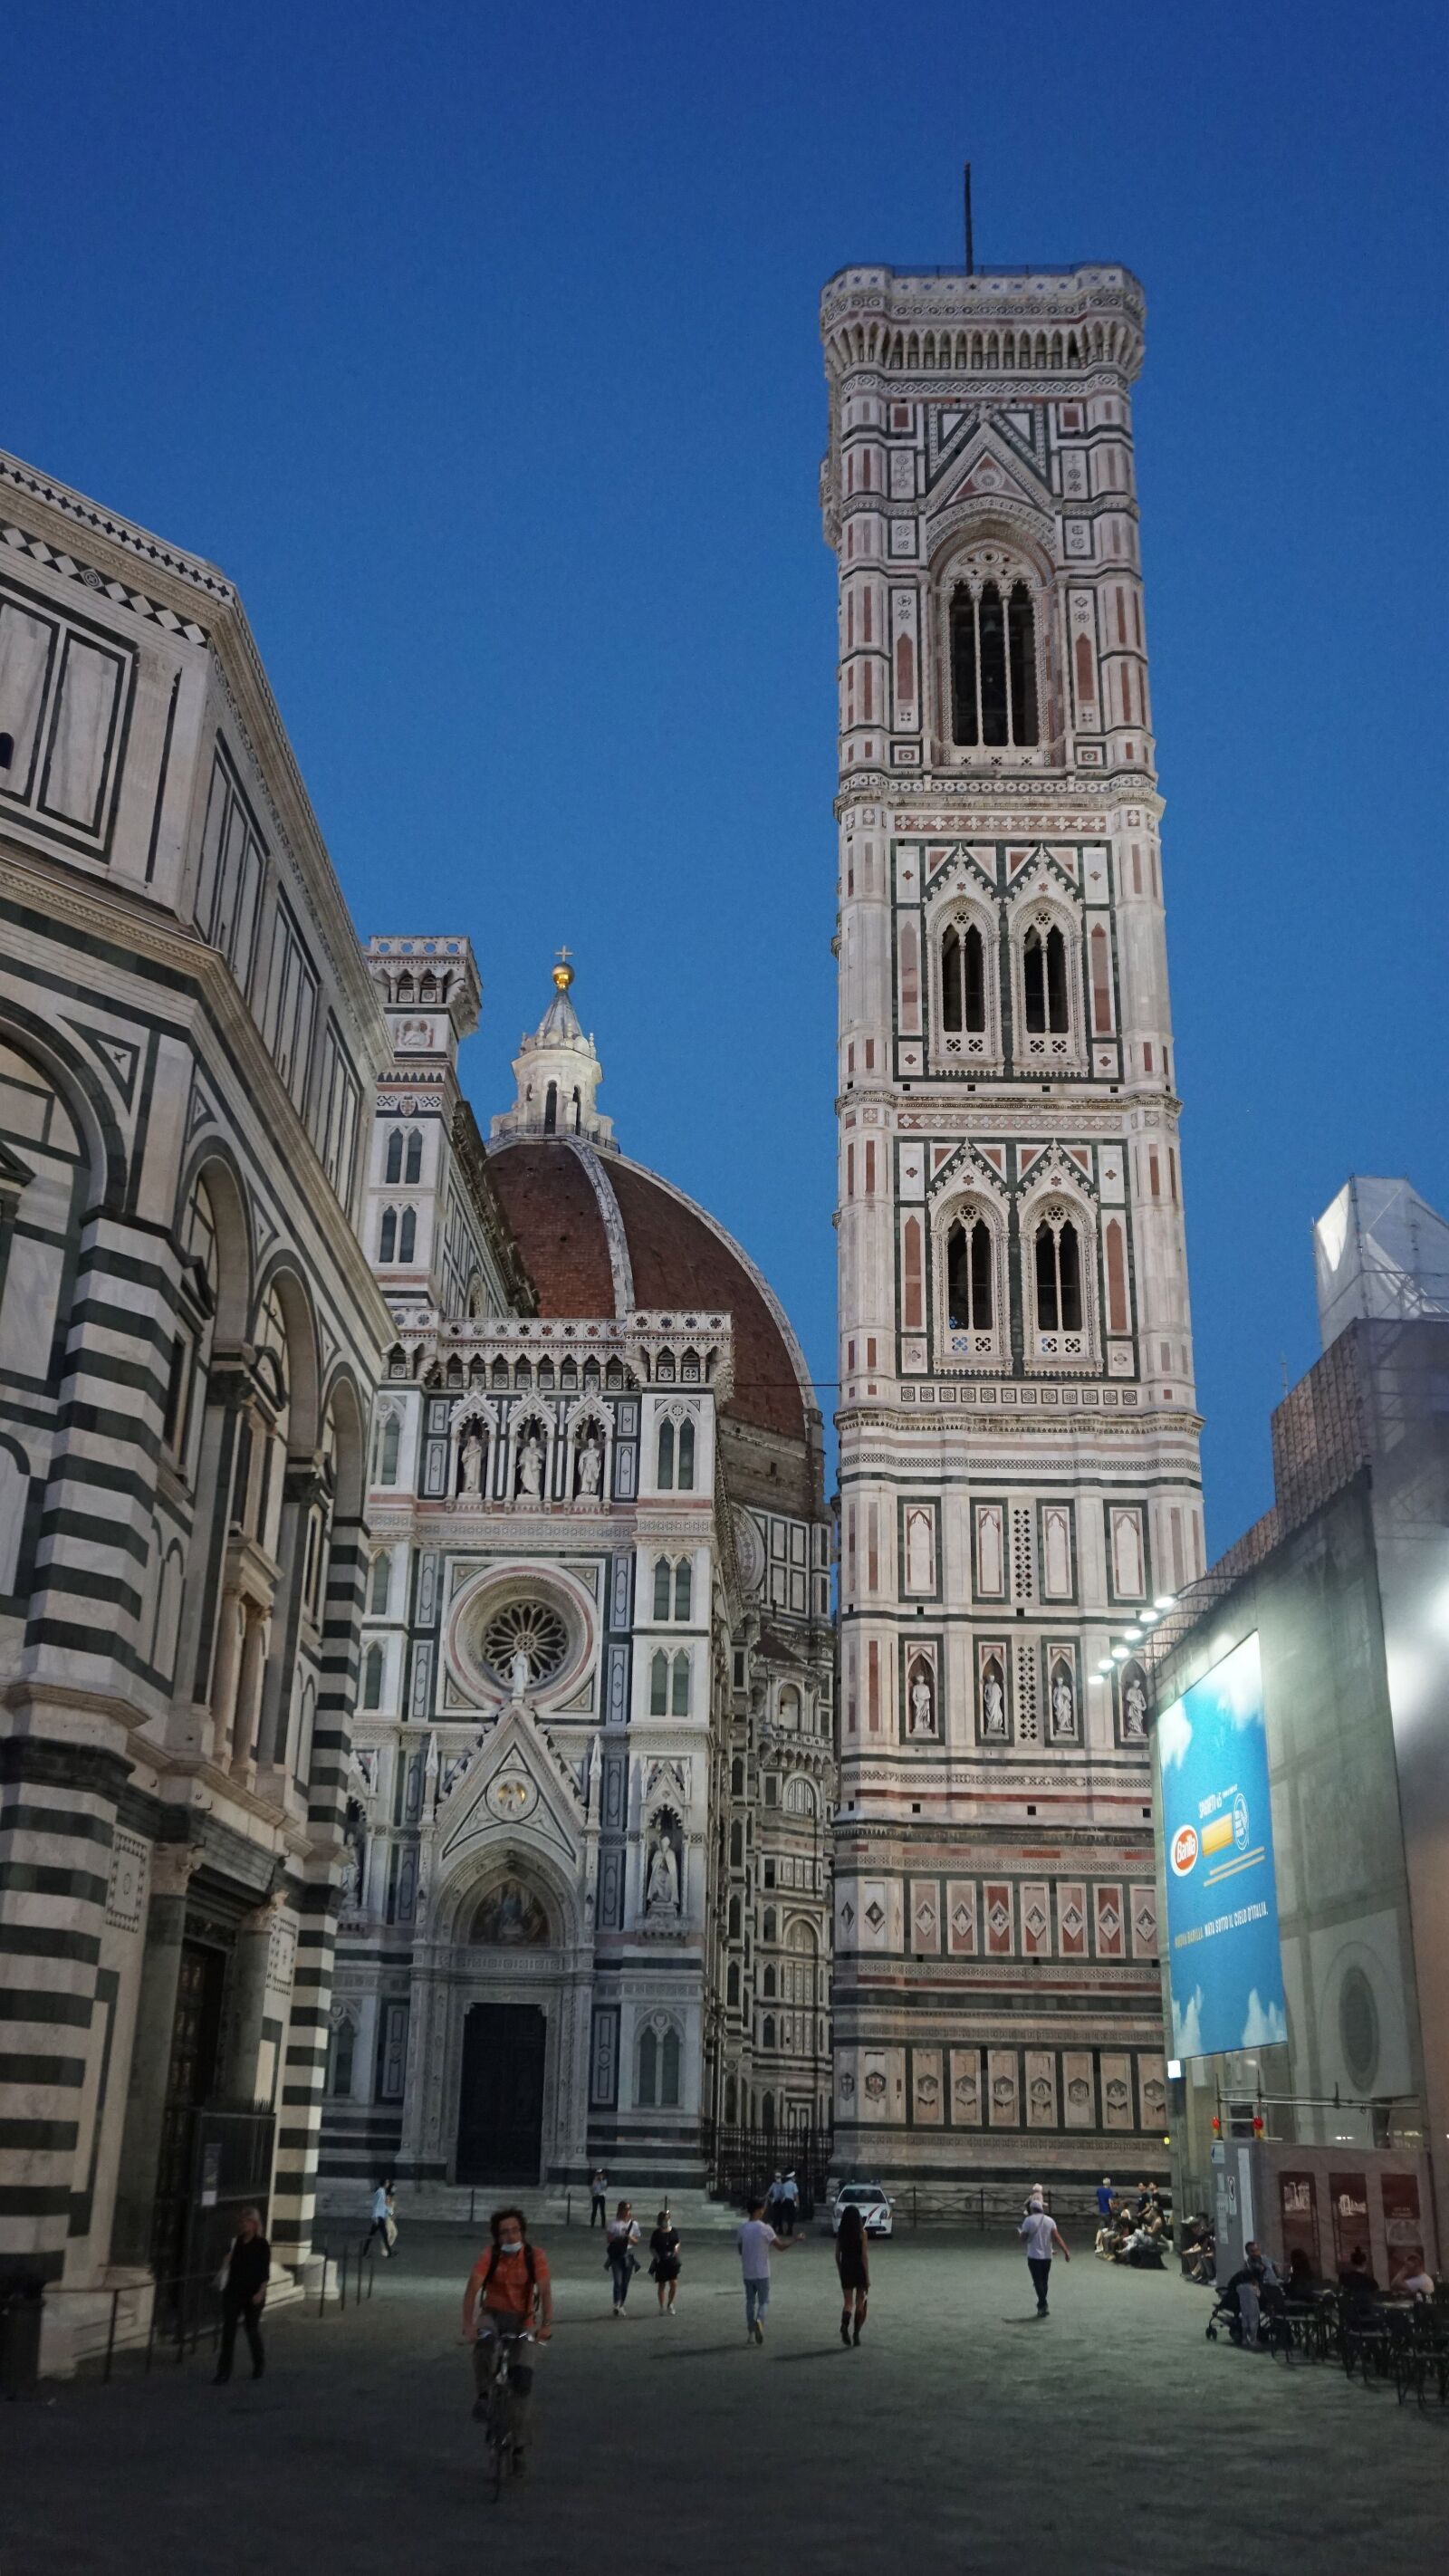 Sony a6300 sample photo. Florence, dom, campanile photography